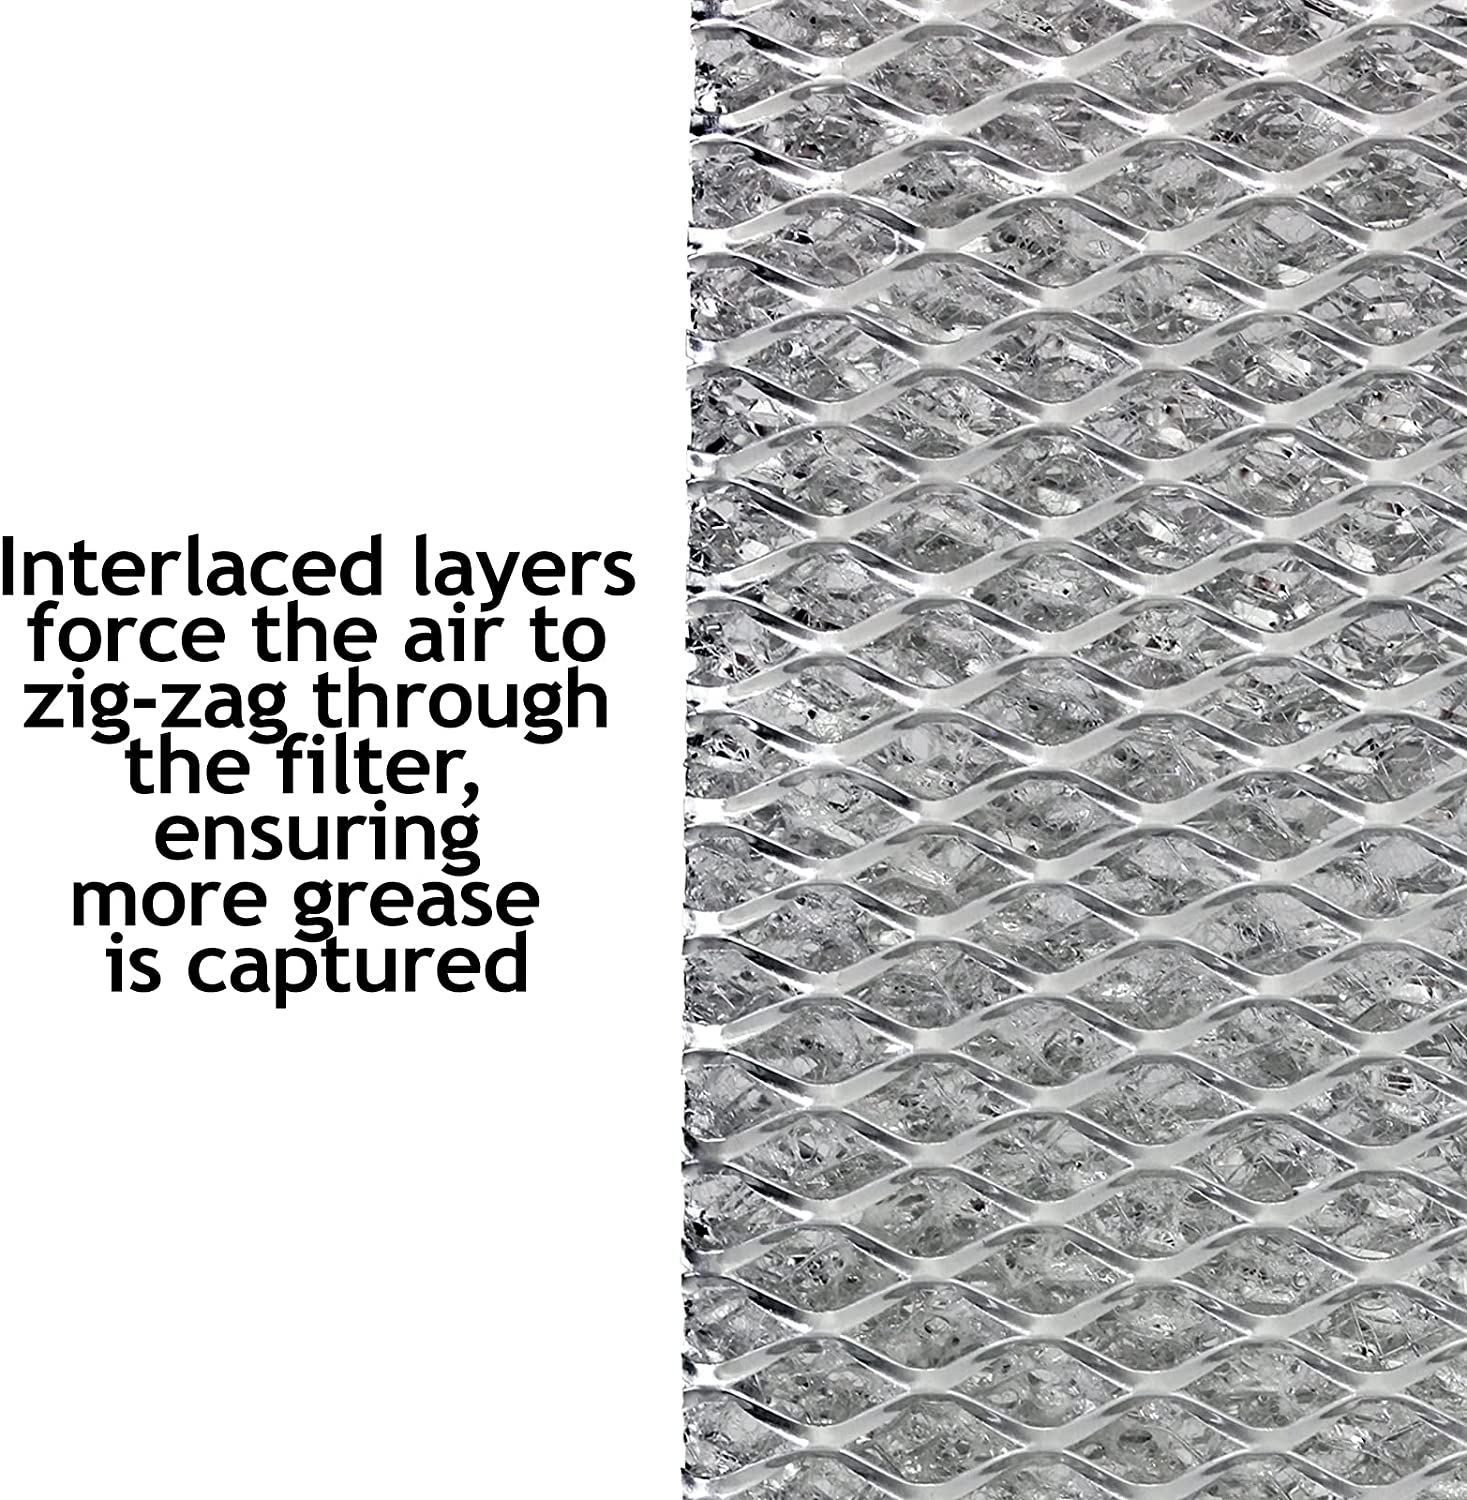 Interlaced layers force the air to zig-zag through the filter, ensuring more grease is captured